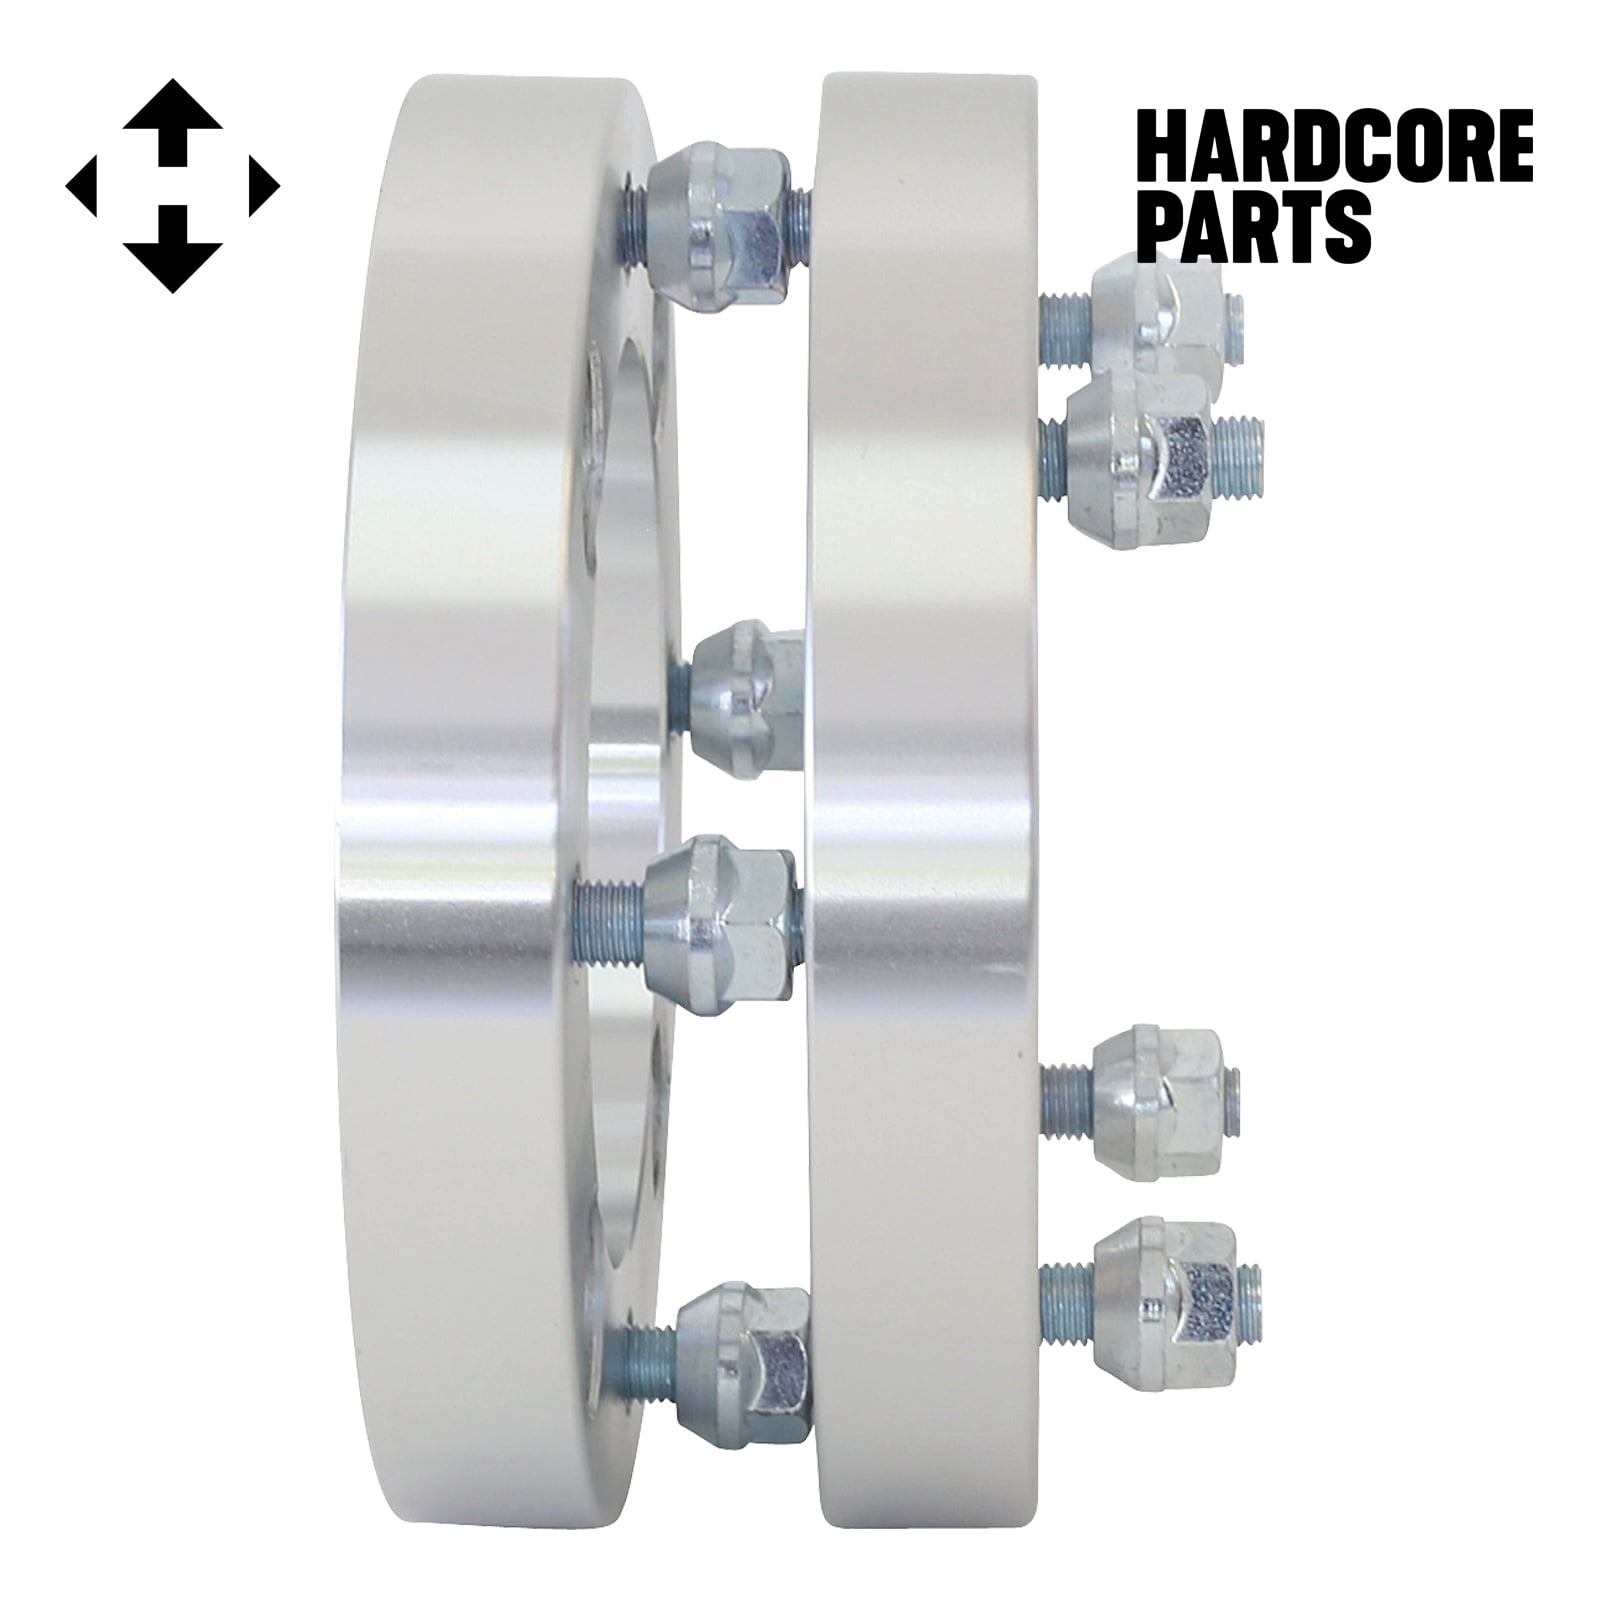 2 inch Per Side 2 QTY ATV Wheel Spacers 4 fits all 4x137 bolt patterns CAN-AM Bombardier Renegade Outlander Commander Kawasaki Mule Prairie Brute Force Bayou 4x137 